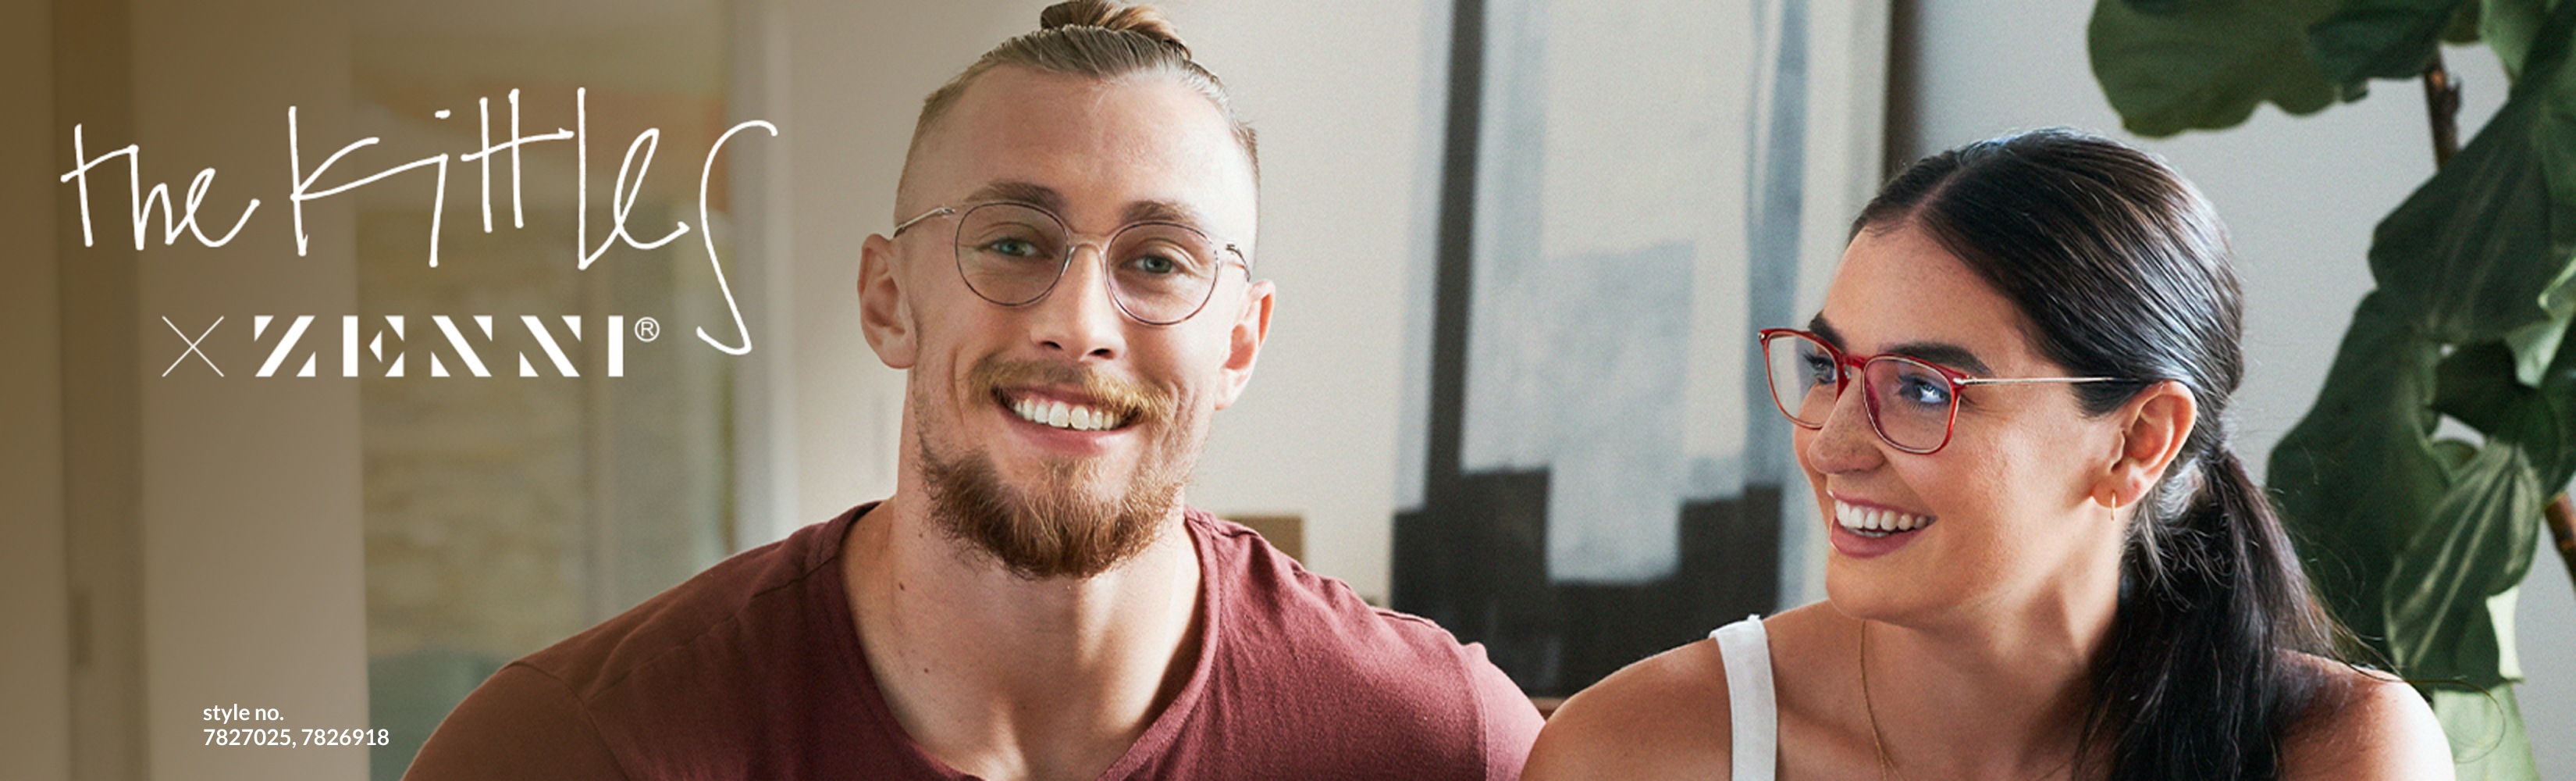 The Kittles and Zenni. Meet the kittles. Image of 49er George Kittle and his wife Claire, wearing zenni stone cold round glasses #7827025, and Zenni thunderbirds square glasses #7826918 respectively, inside their living room.